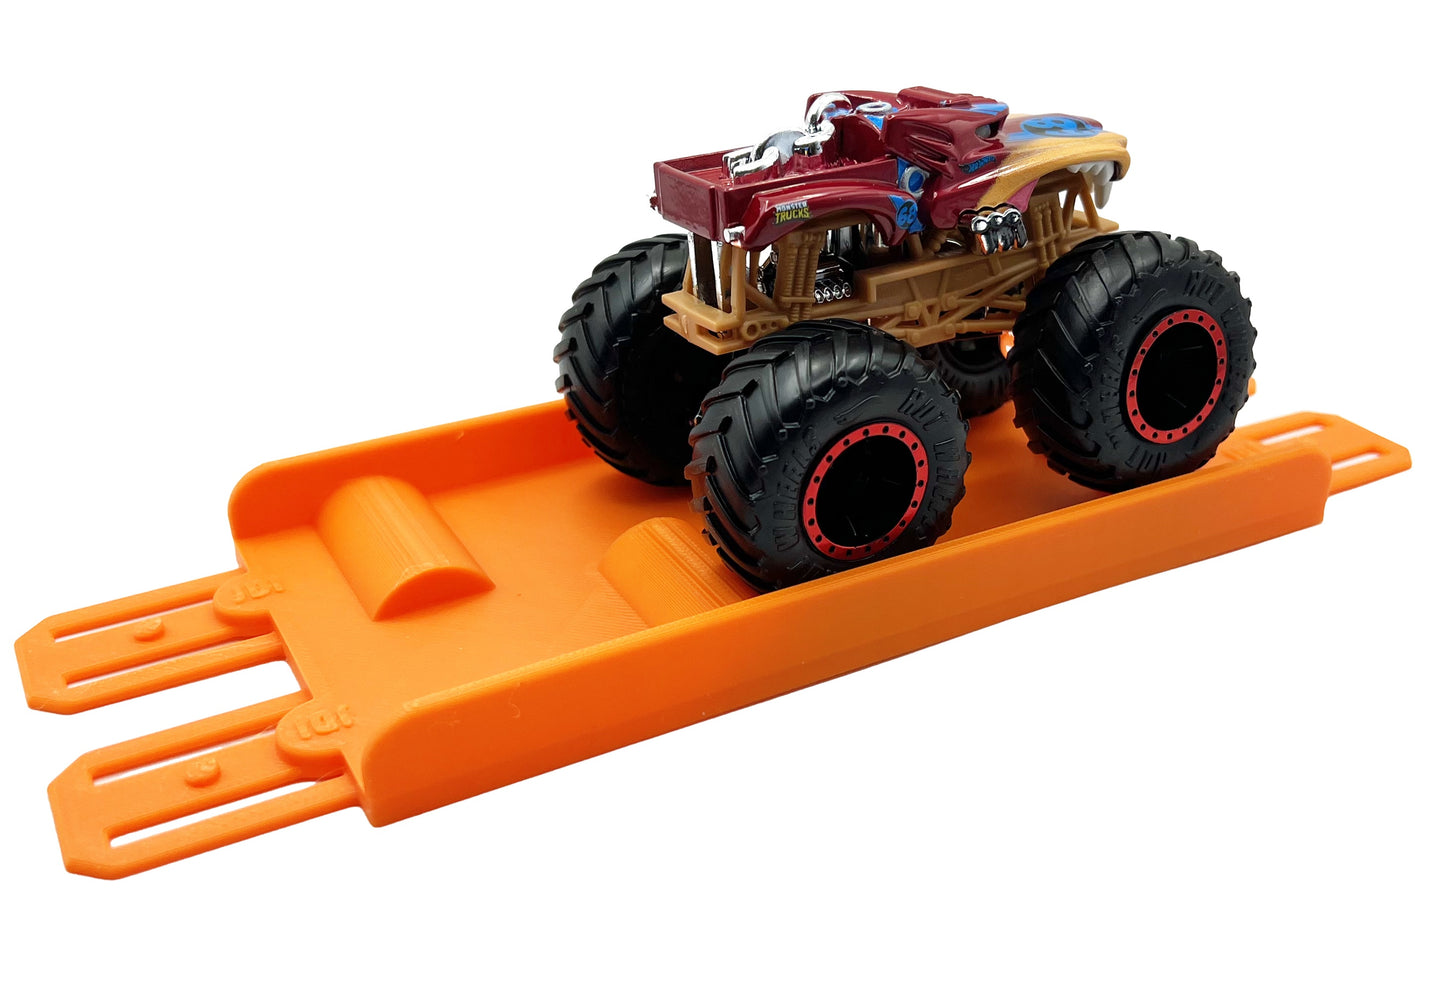 Jeff Did It! - Hot Wheels Monster Truck - 2 Lane Bridge Staggered Bumps Track Upgrade - 3D Printed - Designed and Made in the USA